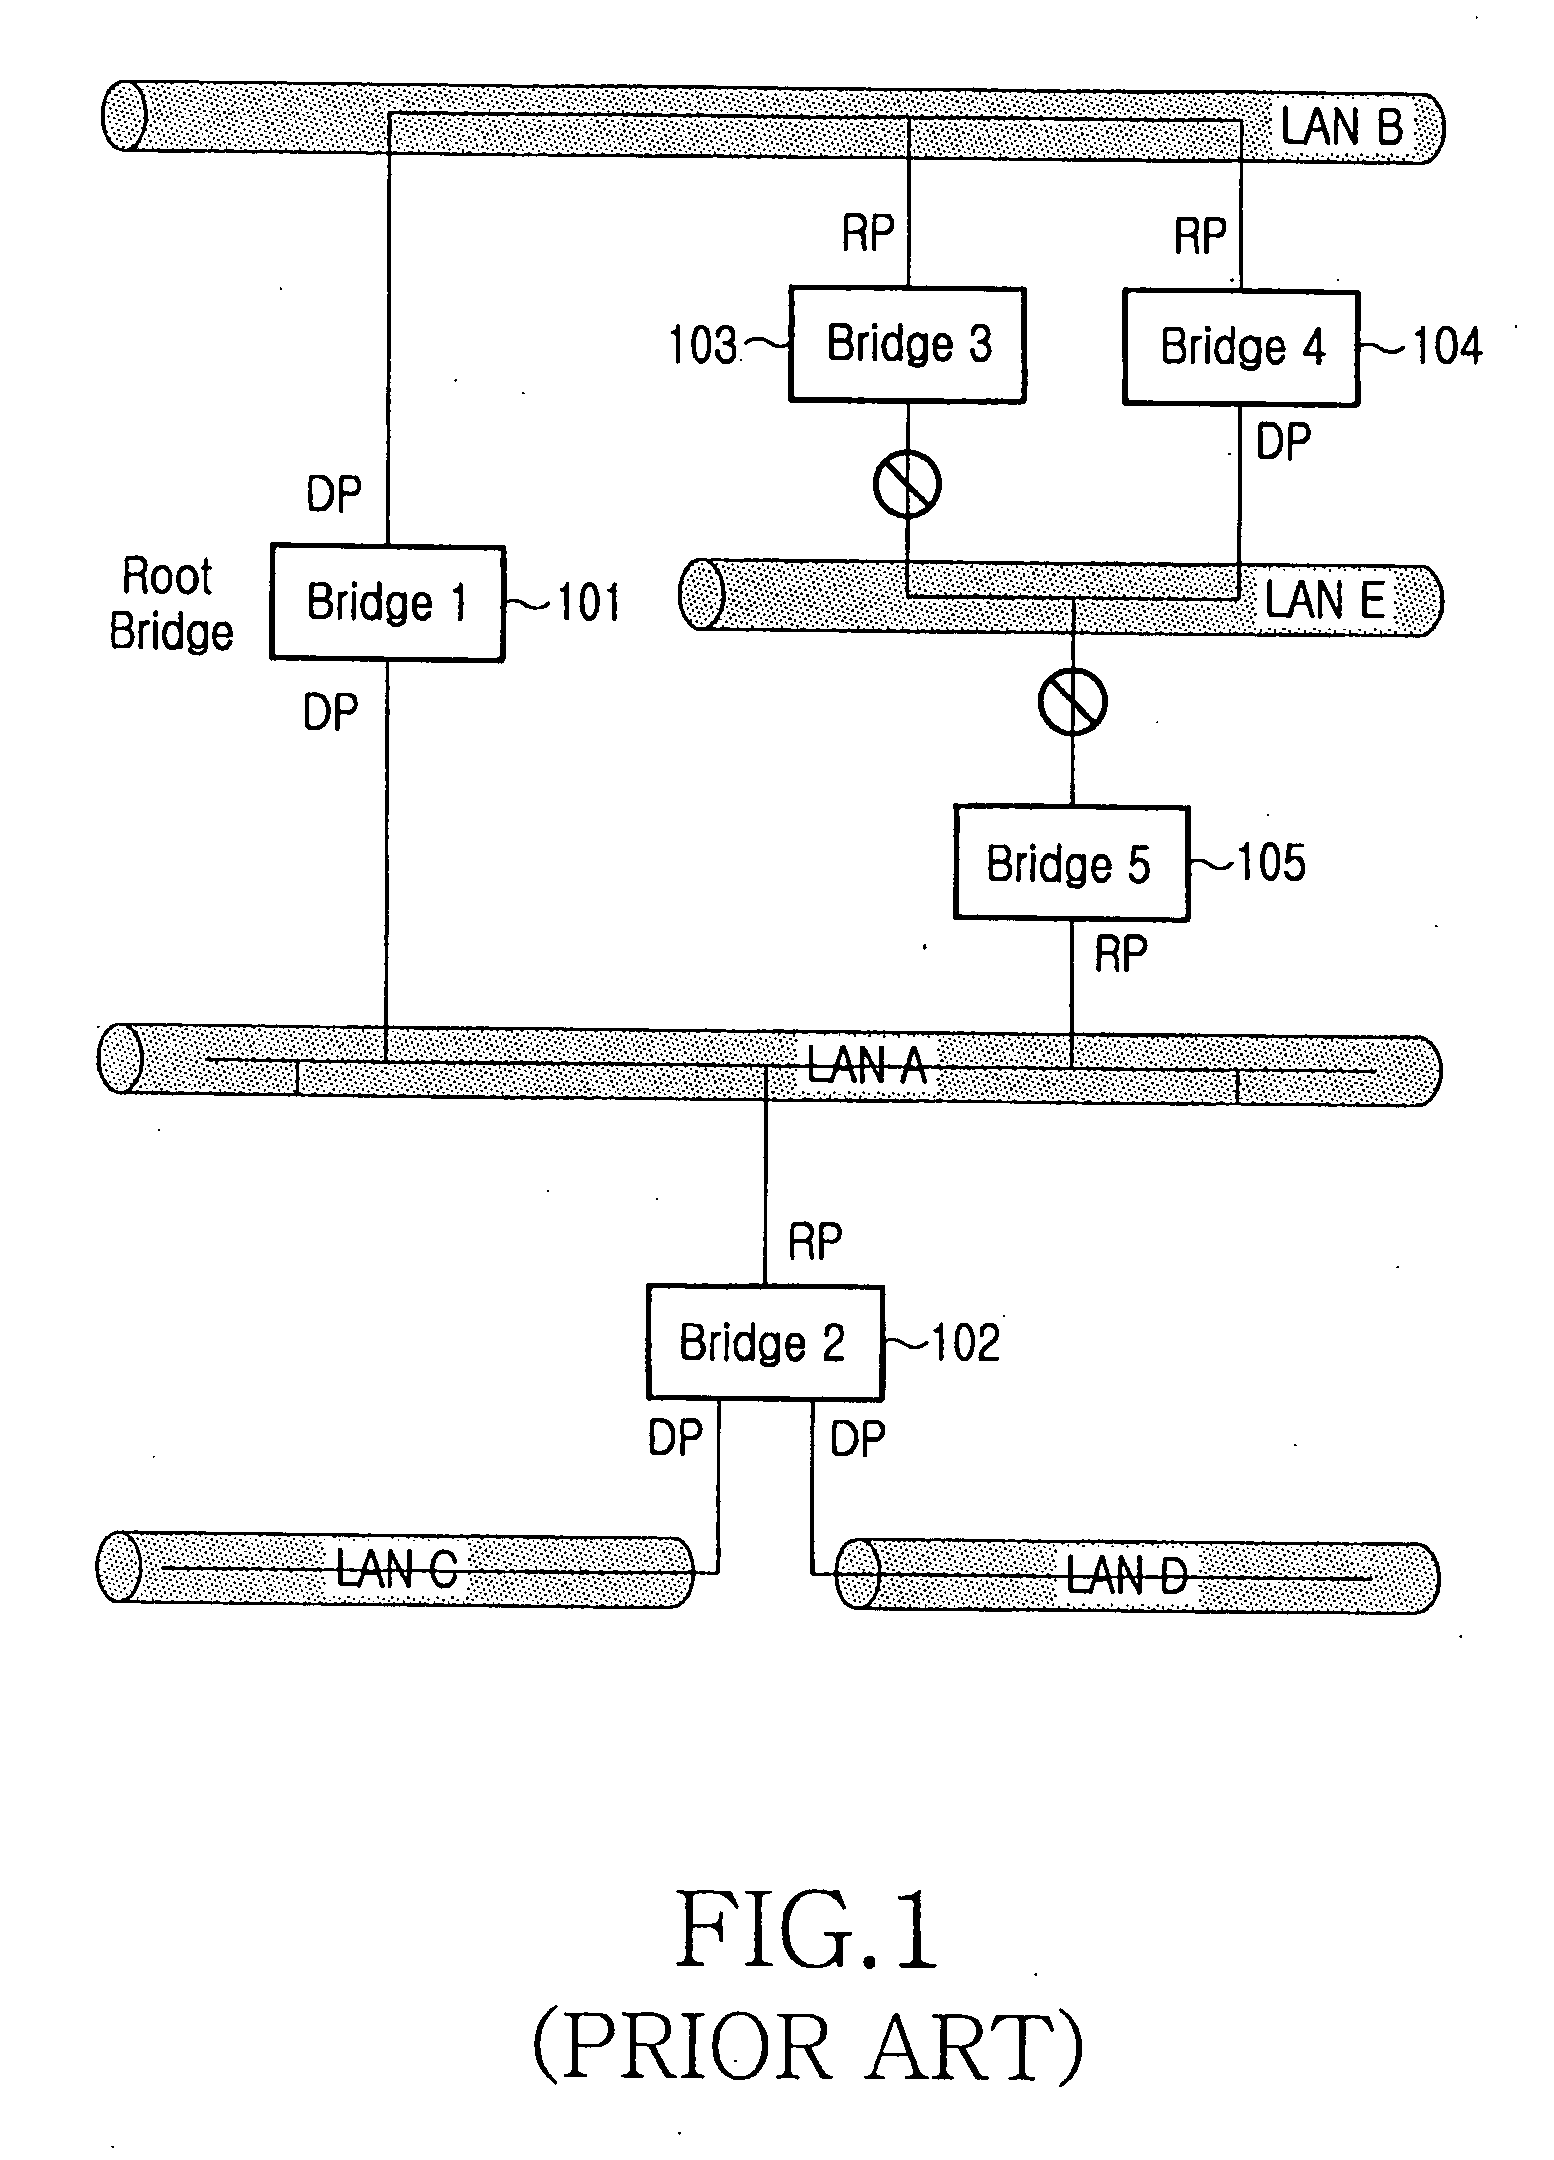 Method for selecting root bridge in configuration of spanning tree